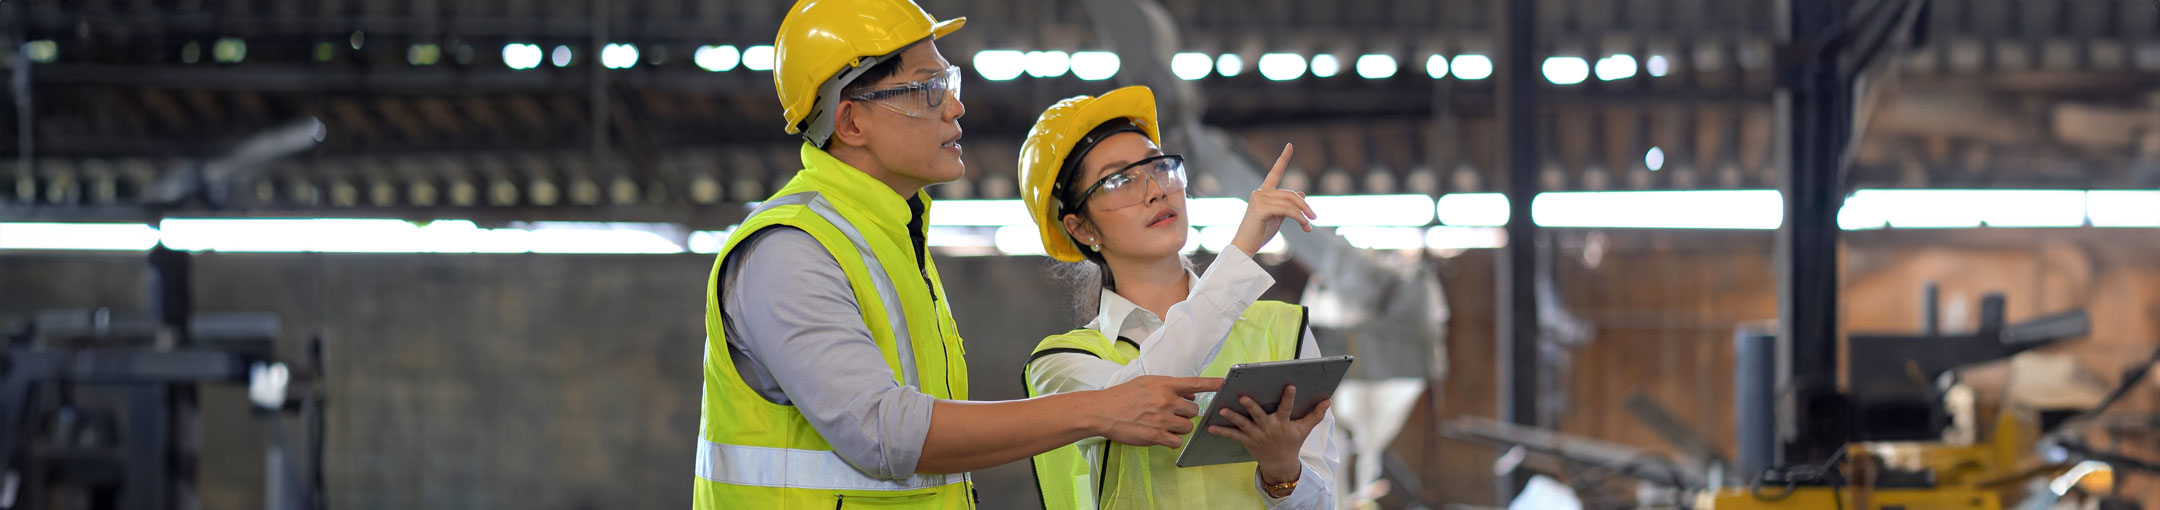 A man and woman in hardhats looking at a tablet and pointing in a manufacturing building.